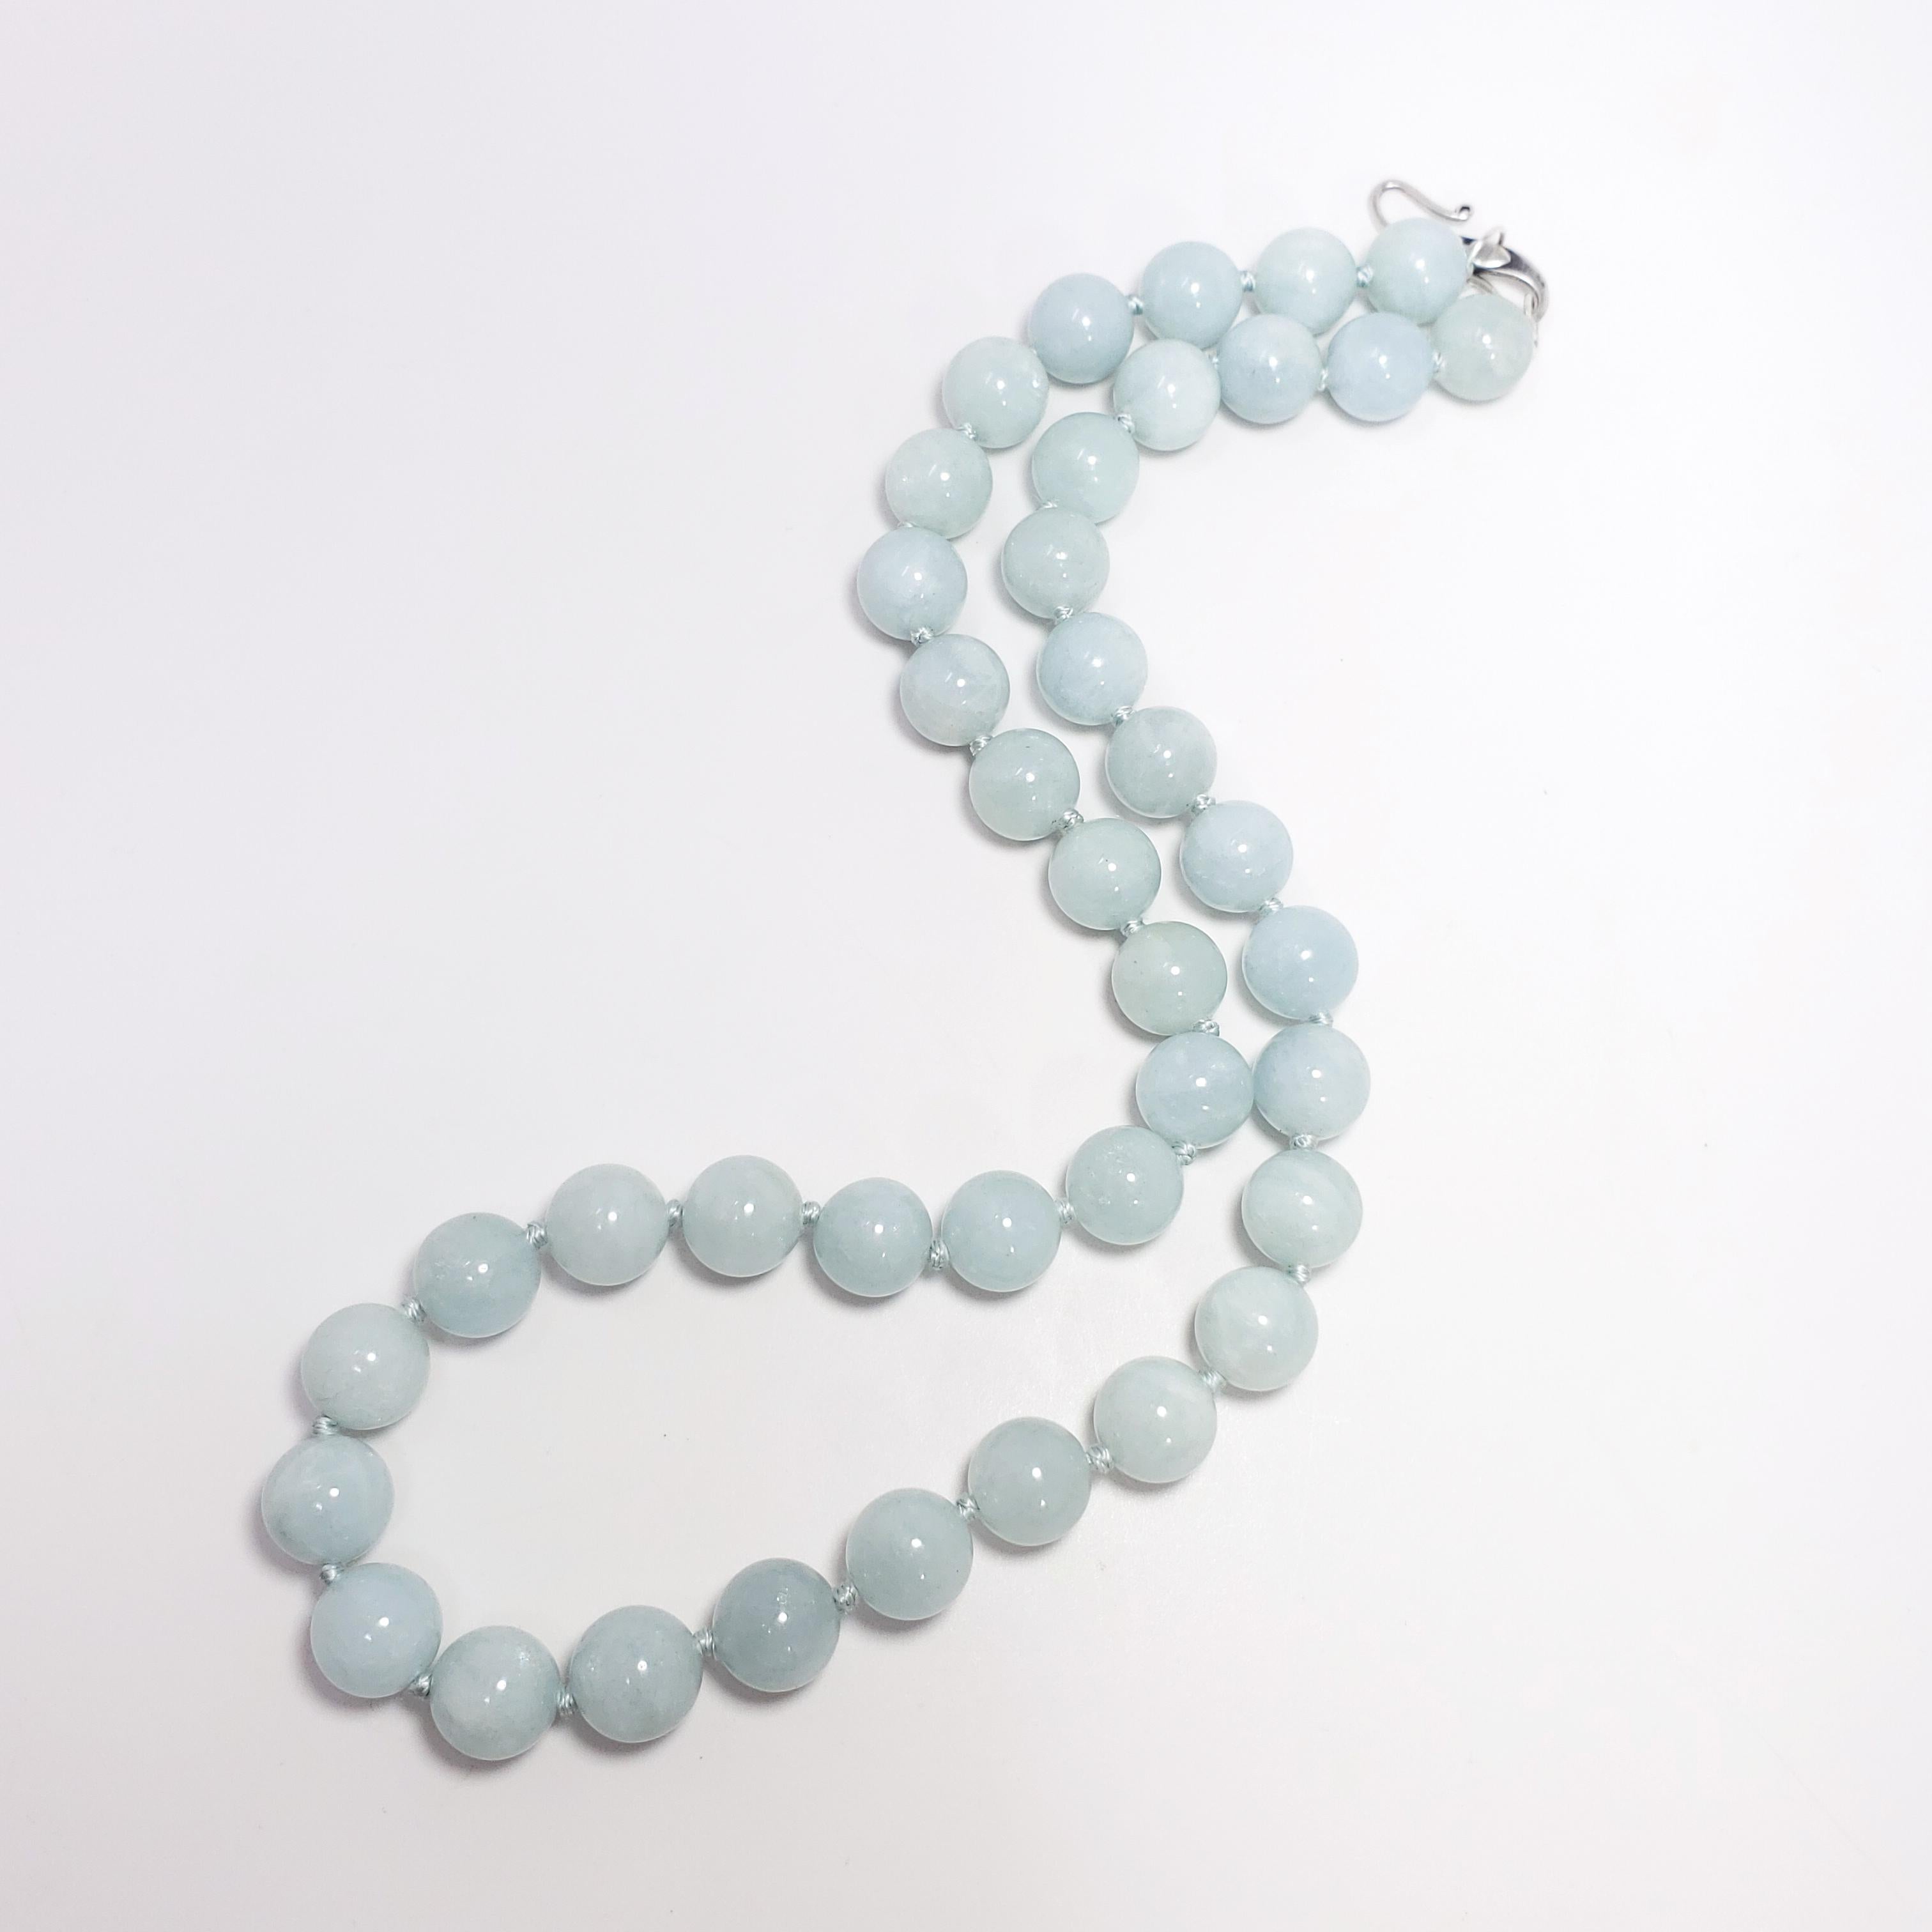 Natural polished aquamarine beads on a teal-colored knotted string, with a matching sterling silver hook and ring clasp. Accentuate your attire with this soft-colored, sophisticated, vintage accessory! 

Beads are approximately 10mm each, and the